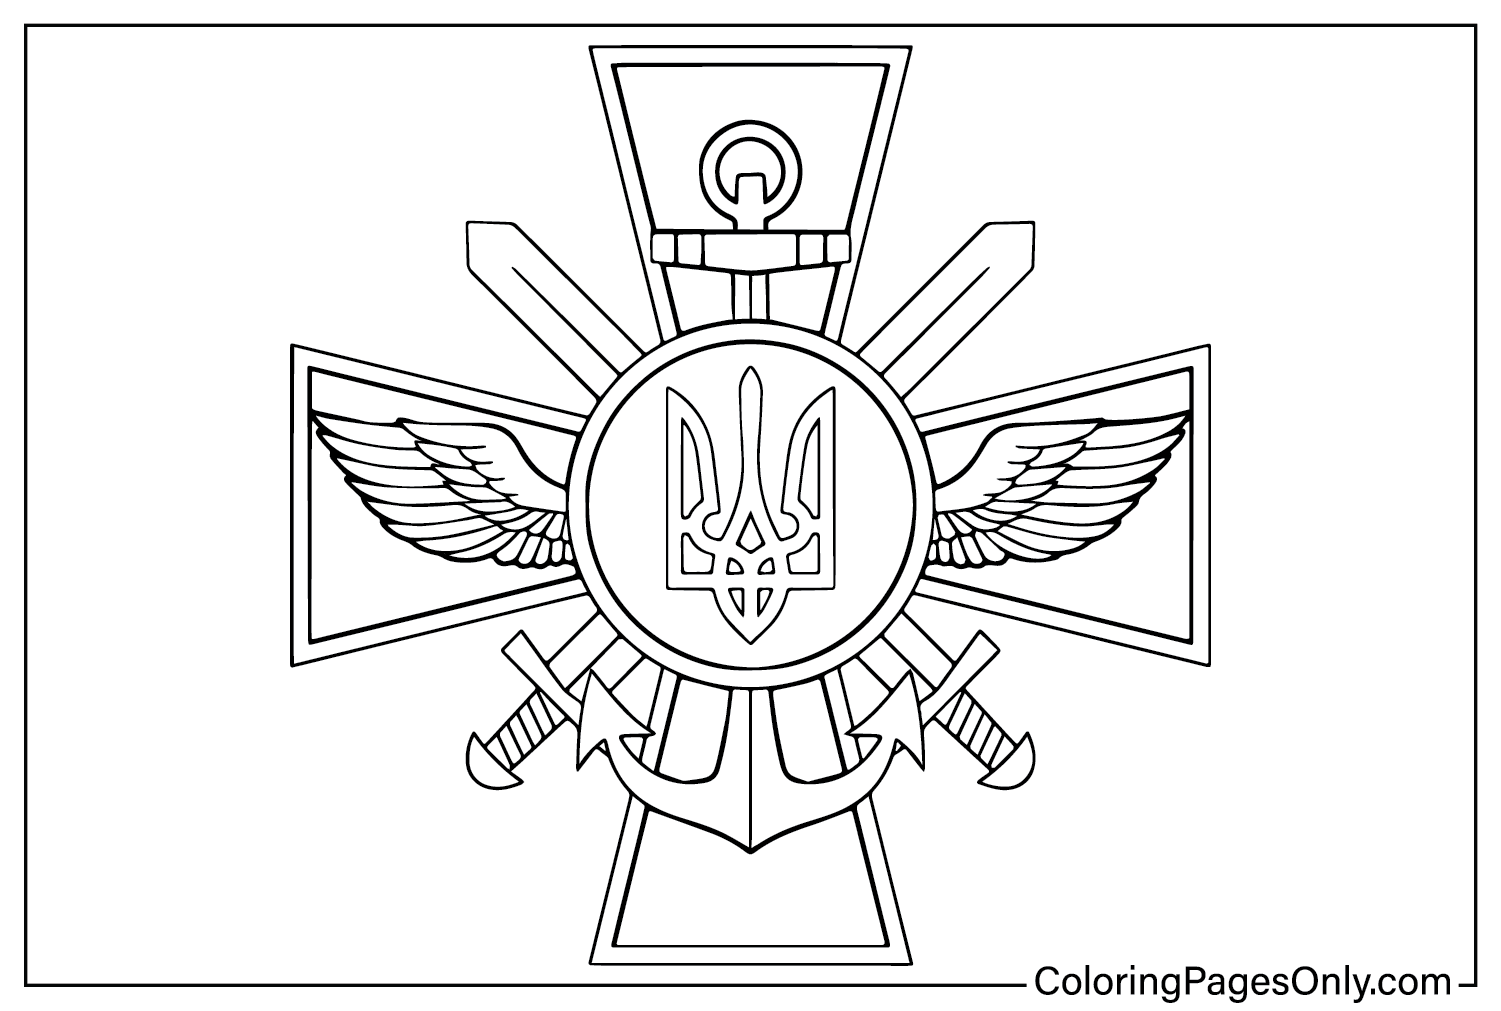 Armed Forces of Ukraine Coloring Page from Ukraine